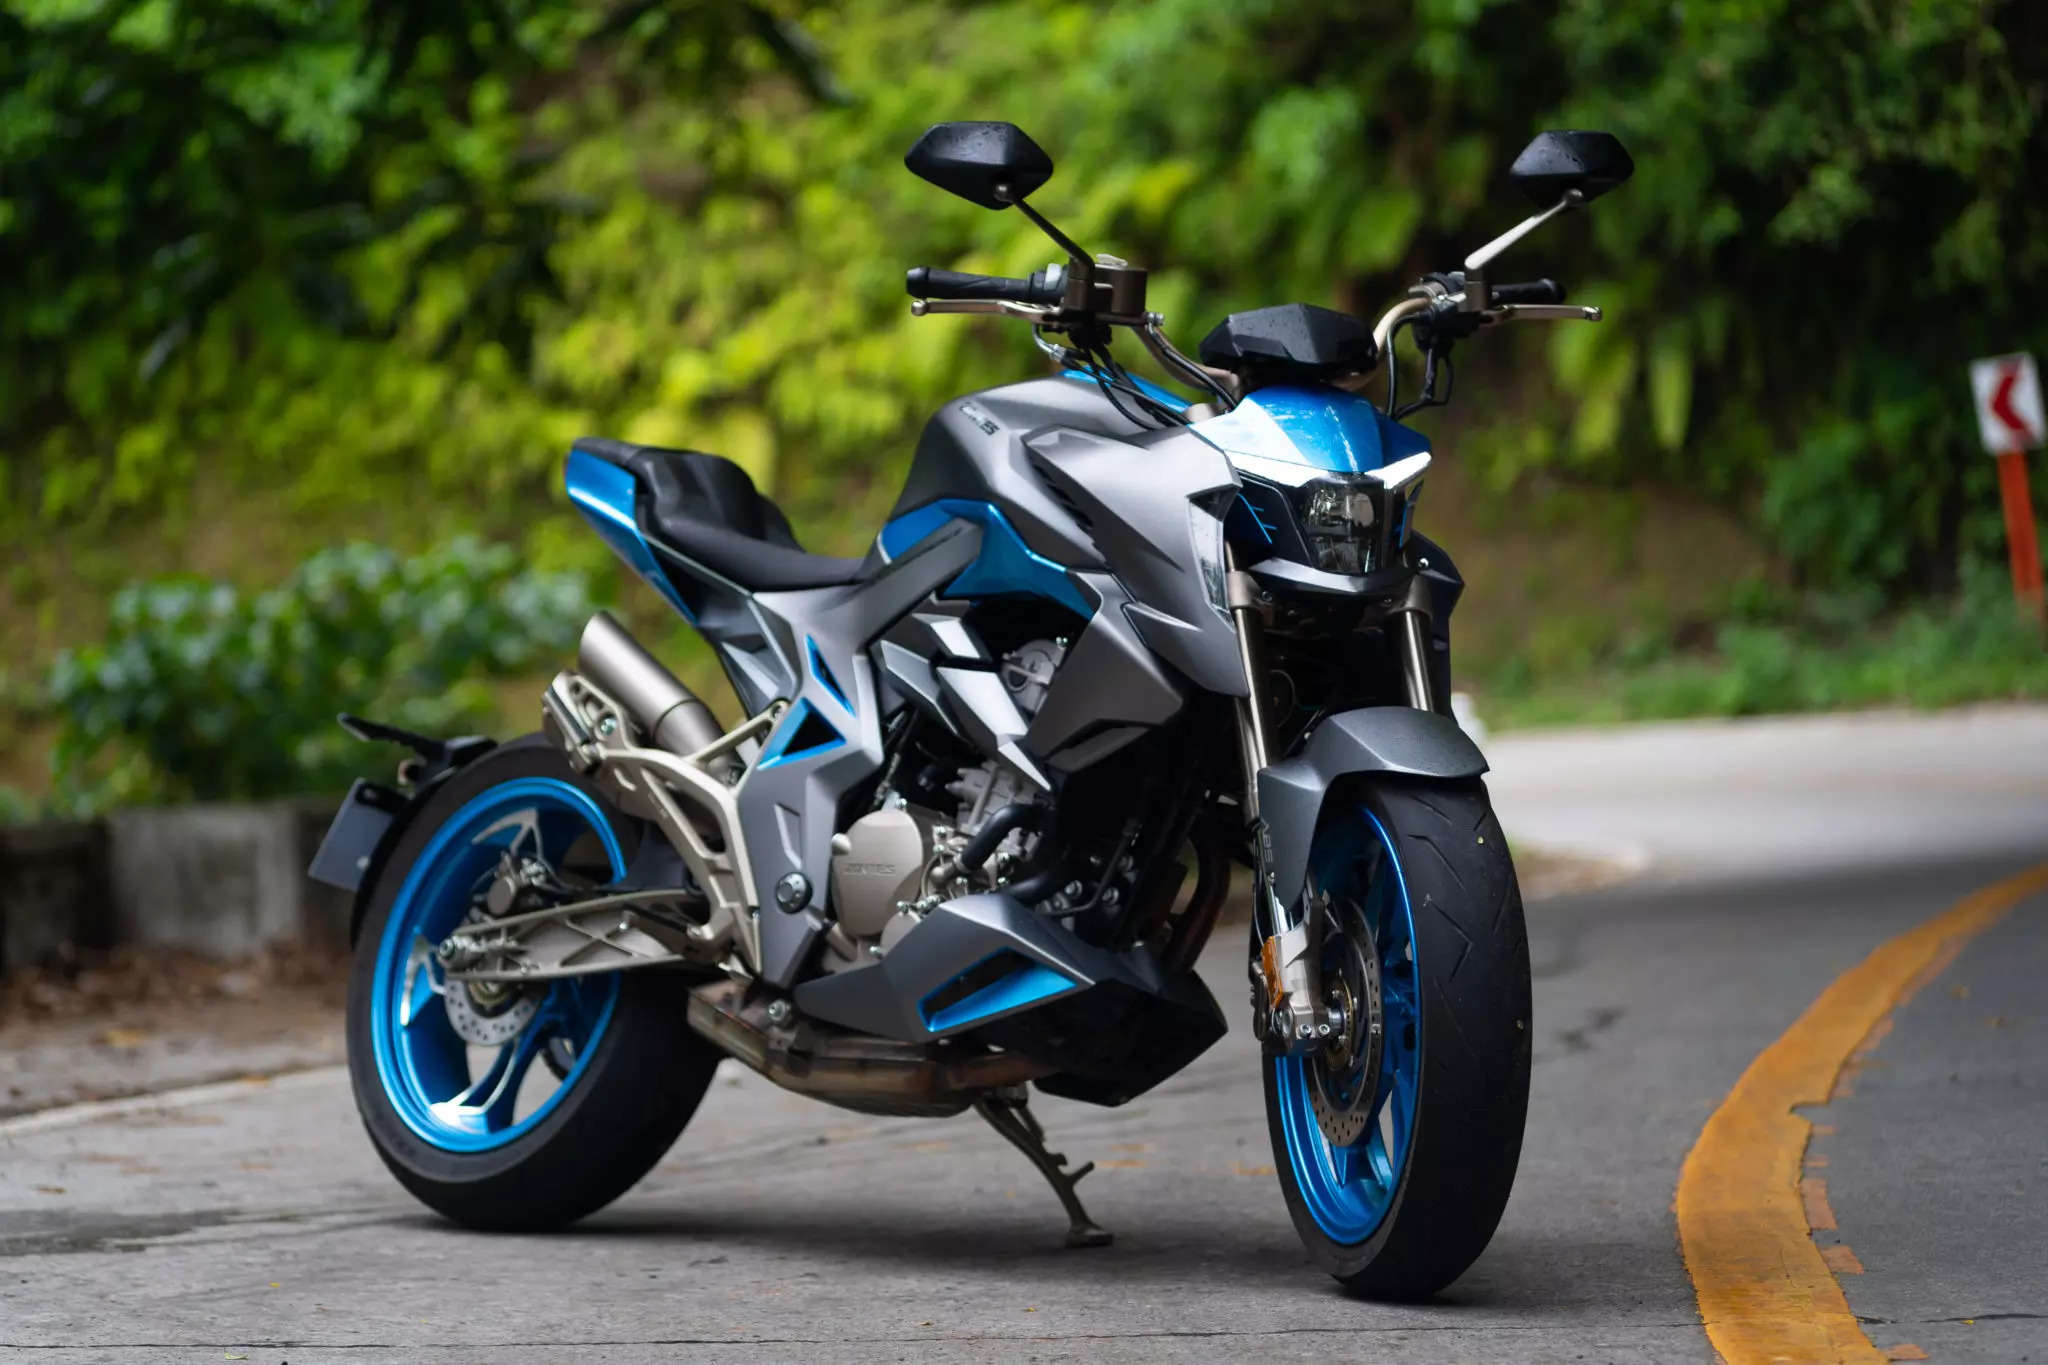  The Chinese motorcycle brand, according to Adishwar Auto, specialises in the production of motorcycles with advanced industrial equipment on a robotised production line and as much as 80 per cent of its components are produced in-house to keep the quality under control.